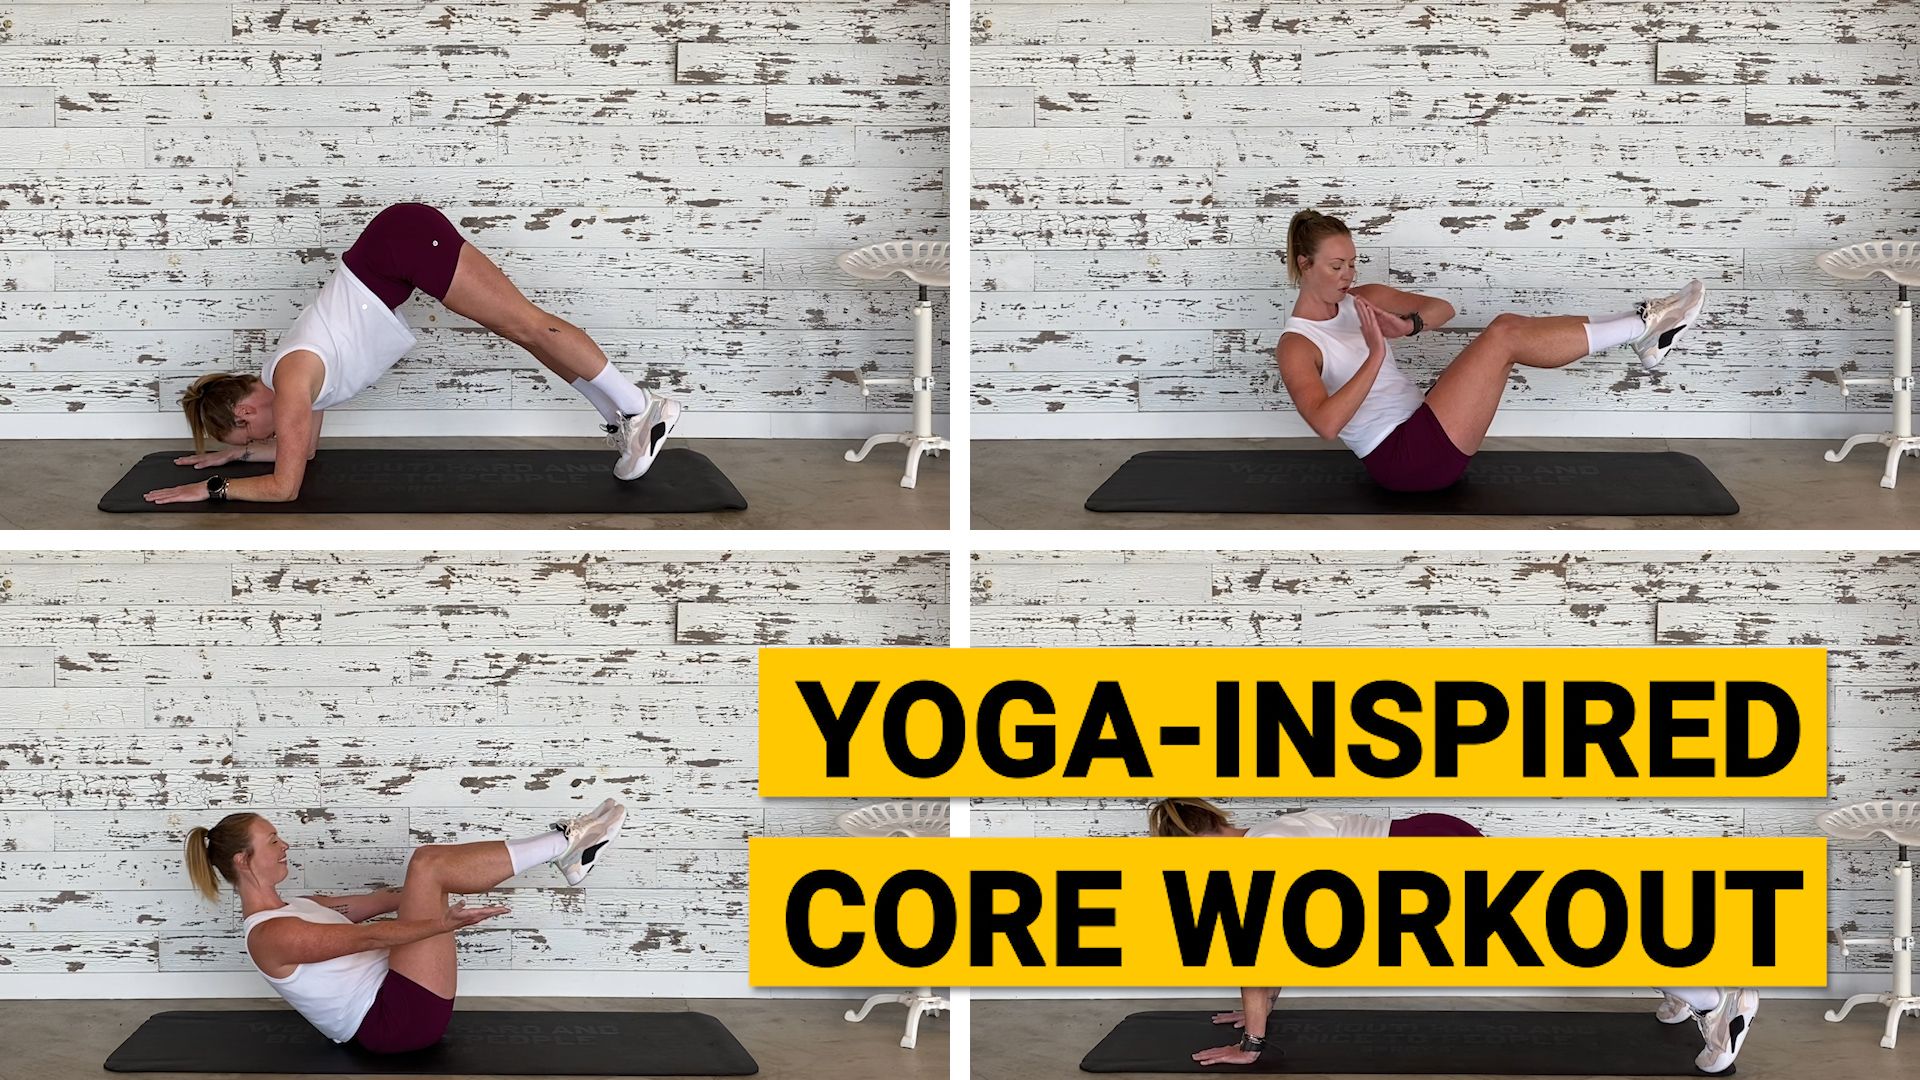 9 yoga poses for workout in core and strength Vector Image